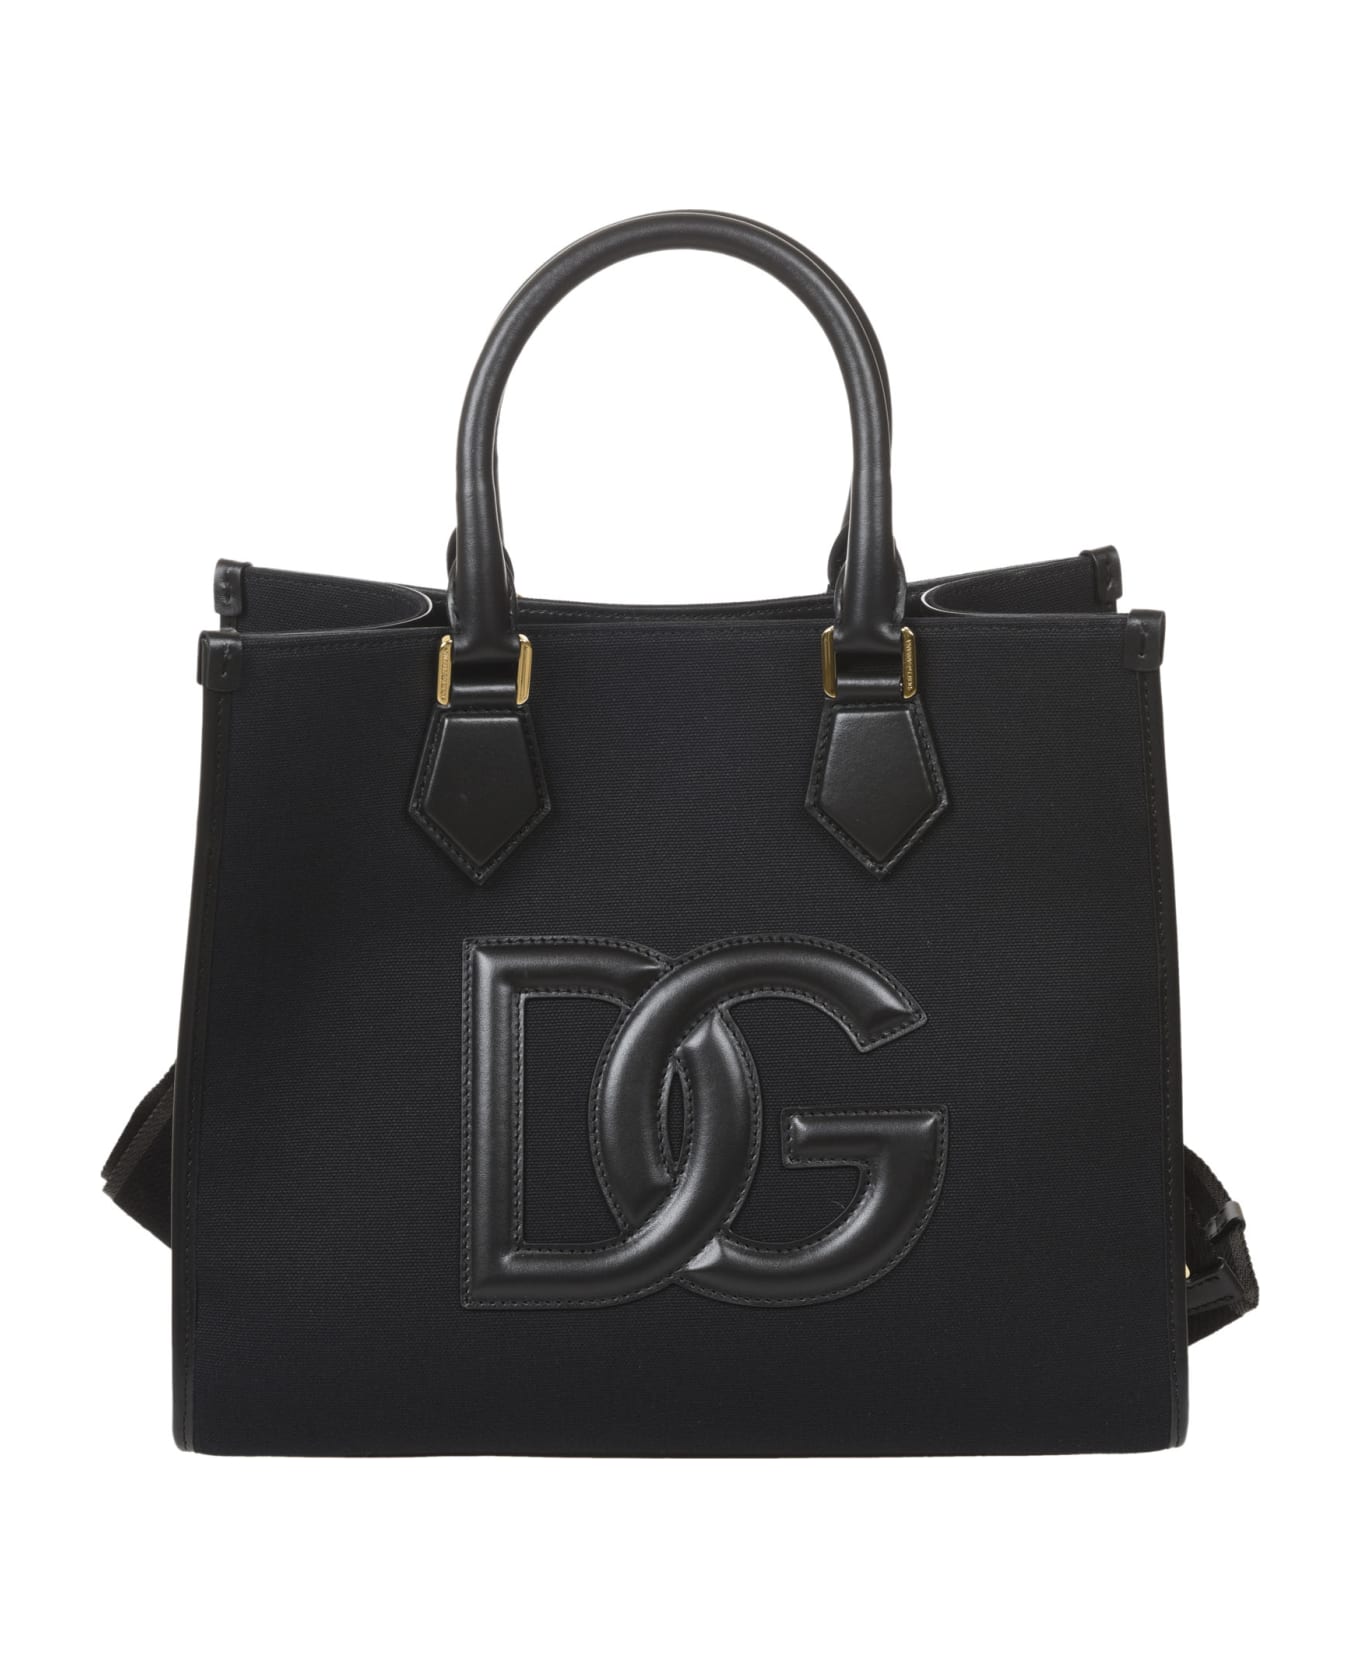 Dolce & Gabbana Logo Patched Top Handle Tote - Black